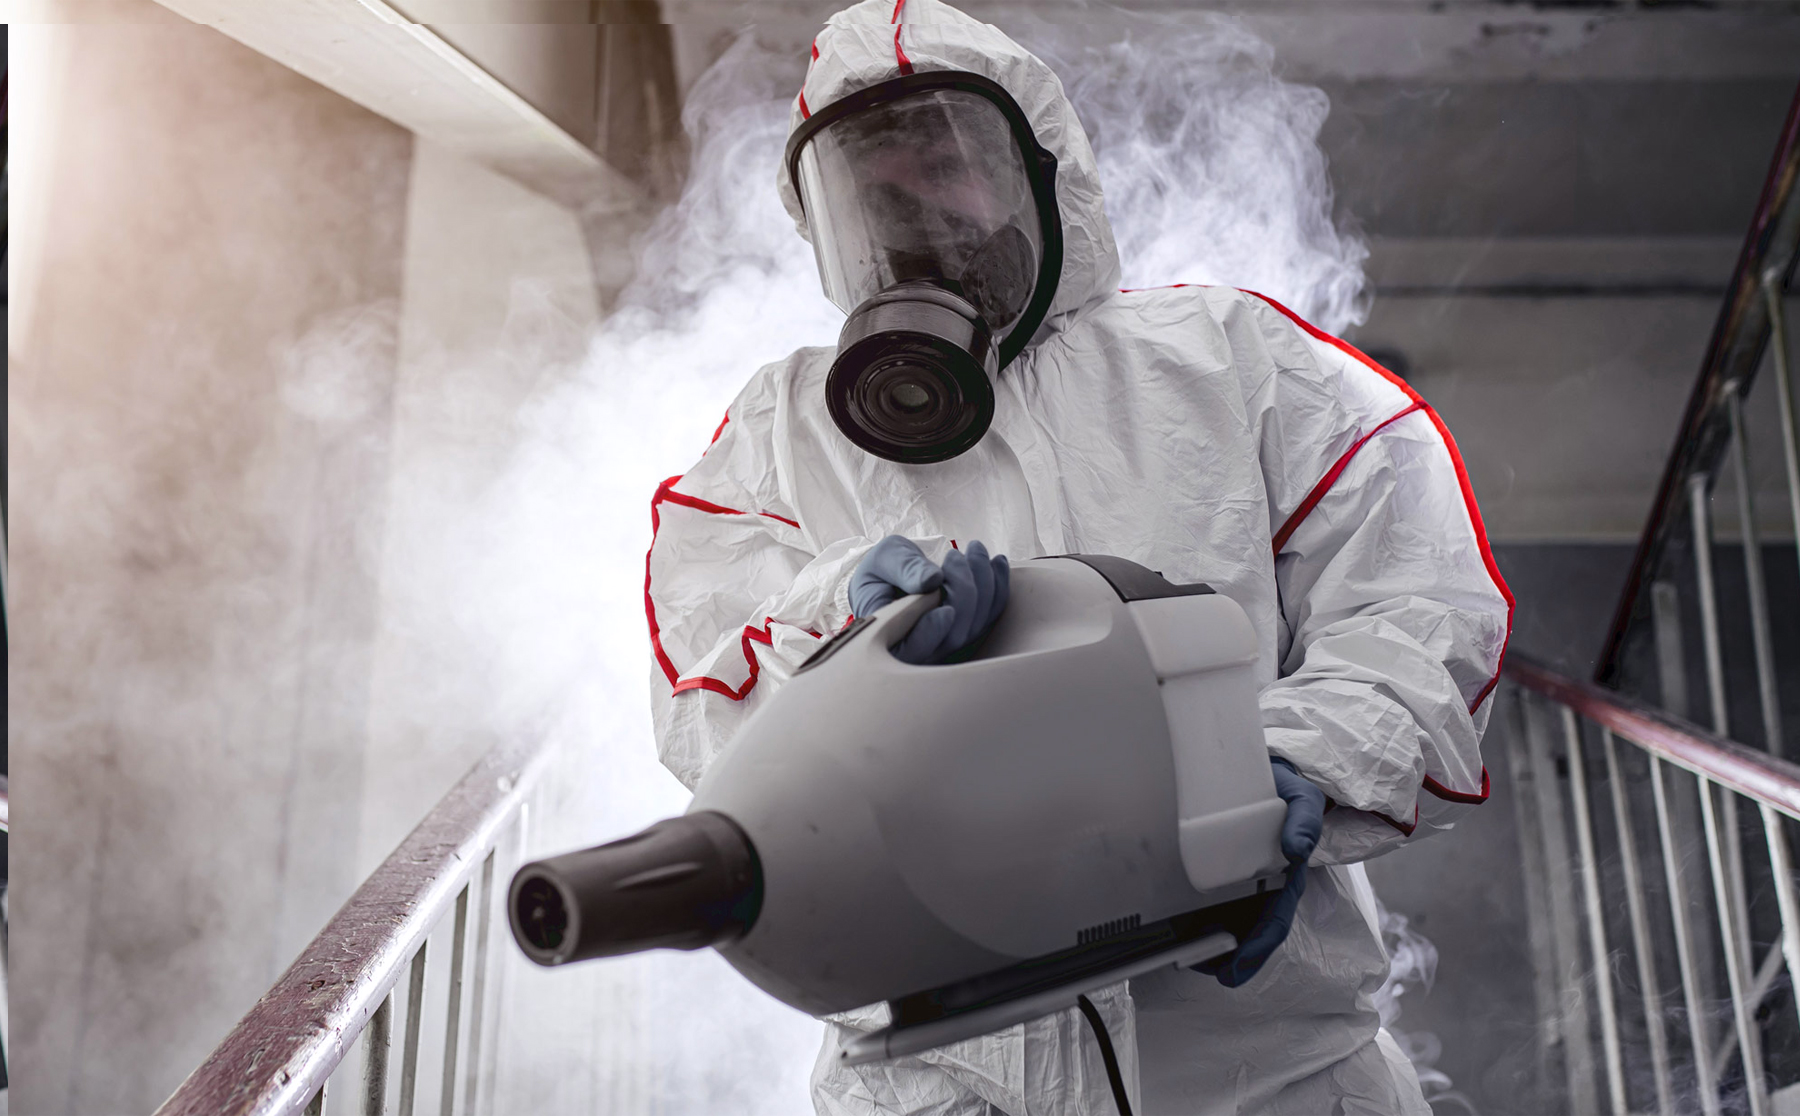 Affordable Asbestos Removal Services- A Safe Choice for Your Home